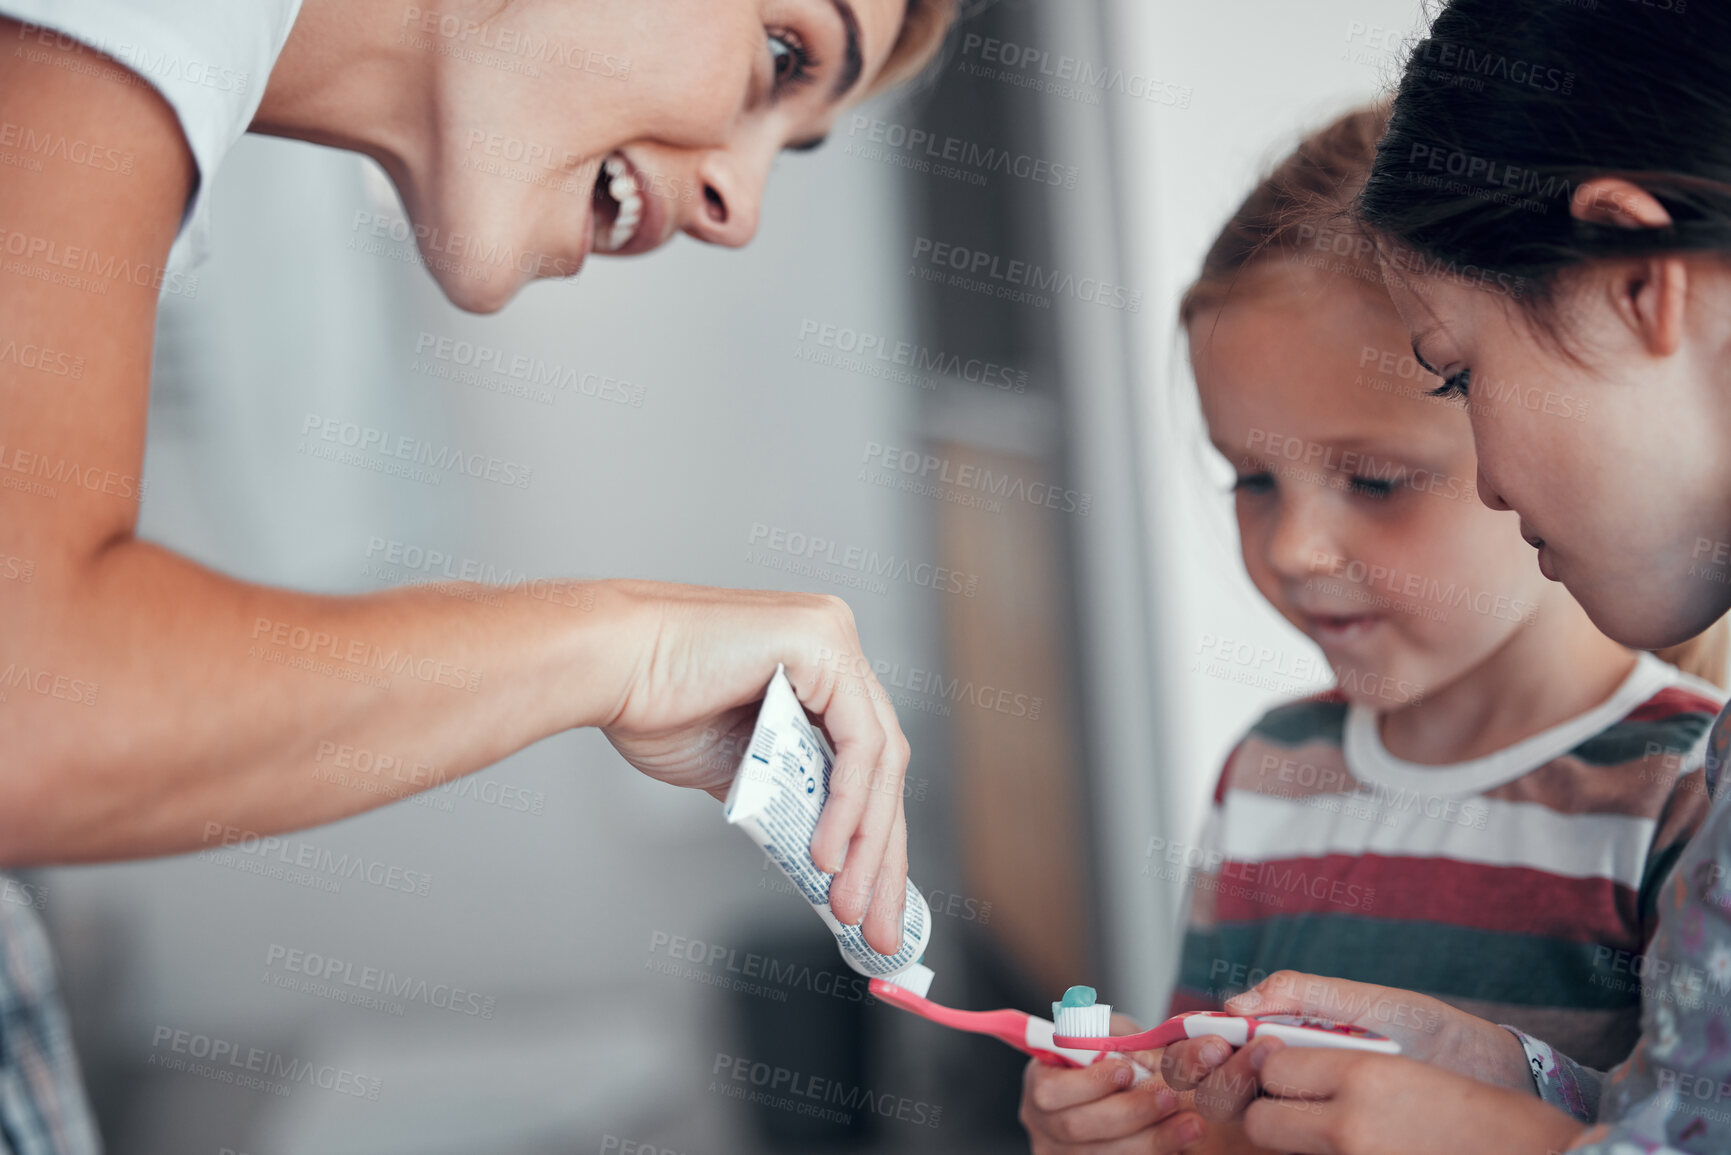 Buy stock photo Caucasian mom squeezing toothpaste from a tube onto toothbrushes of two little girls in pyjamas at home. Teaching kids good hygiene habits. Brush twice daily to prevent tooth decay and gum disease